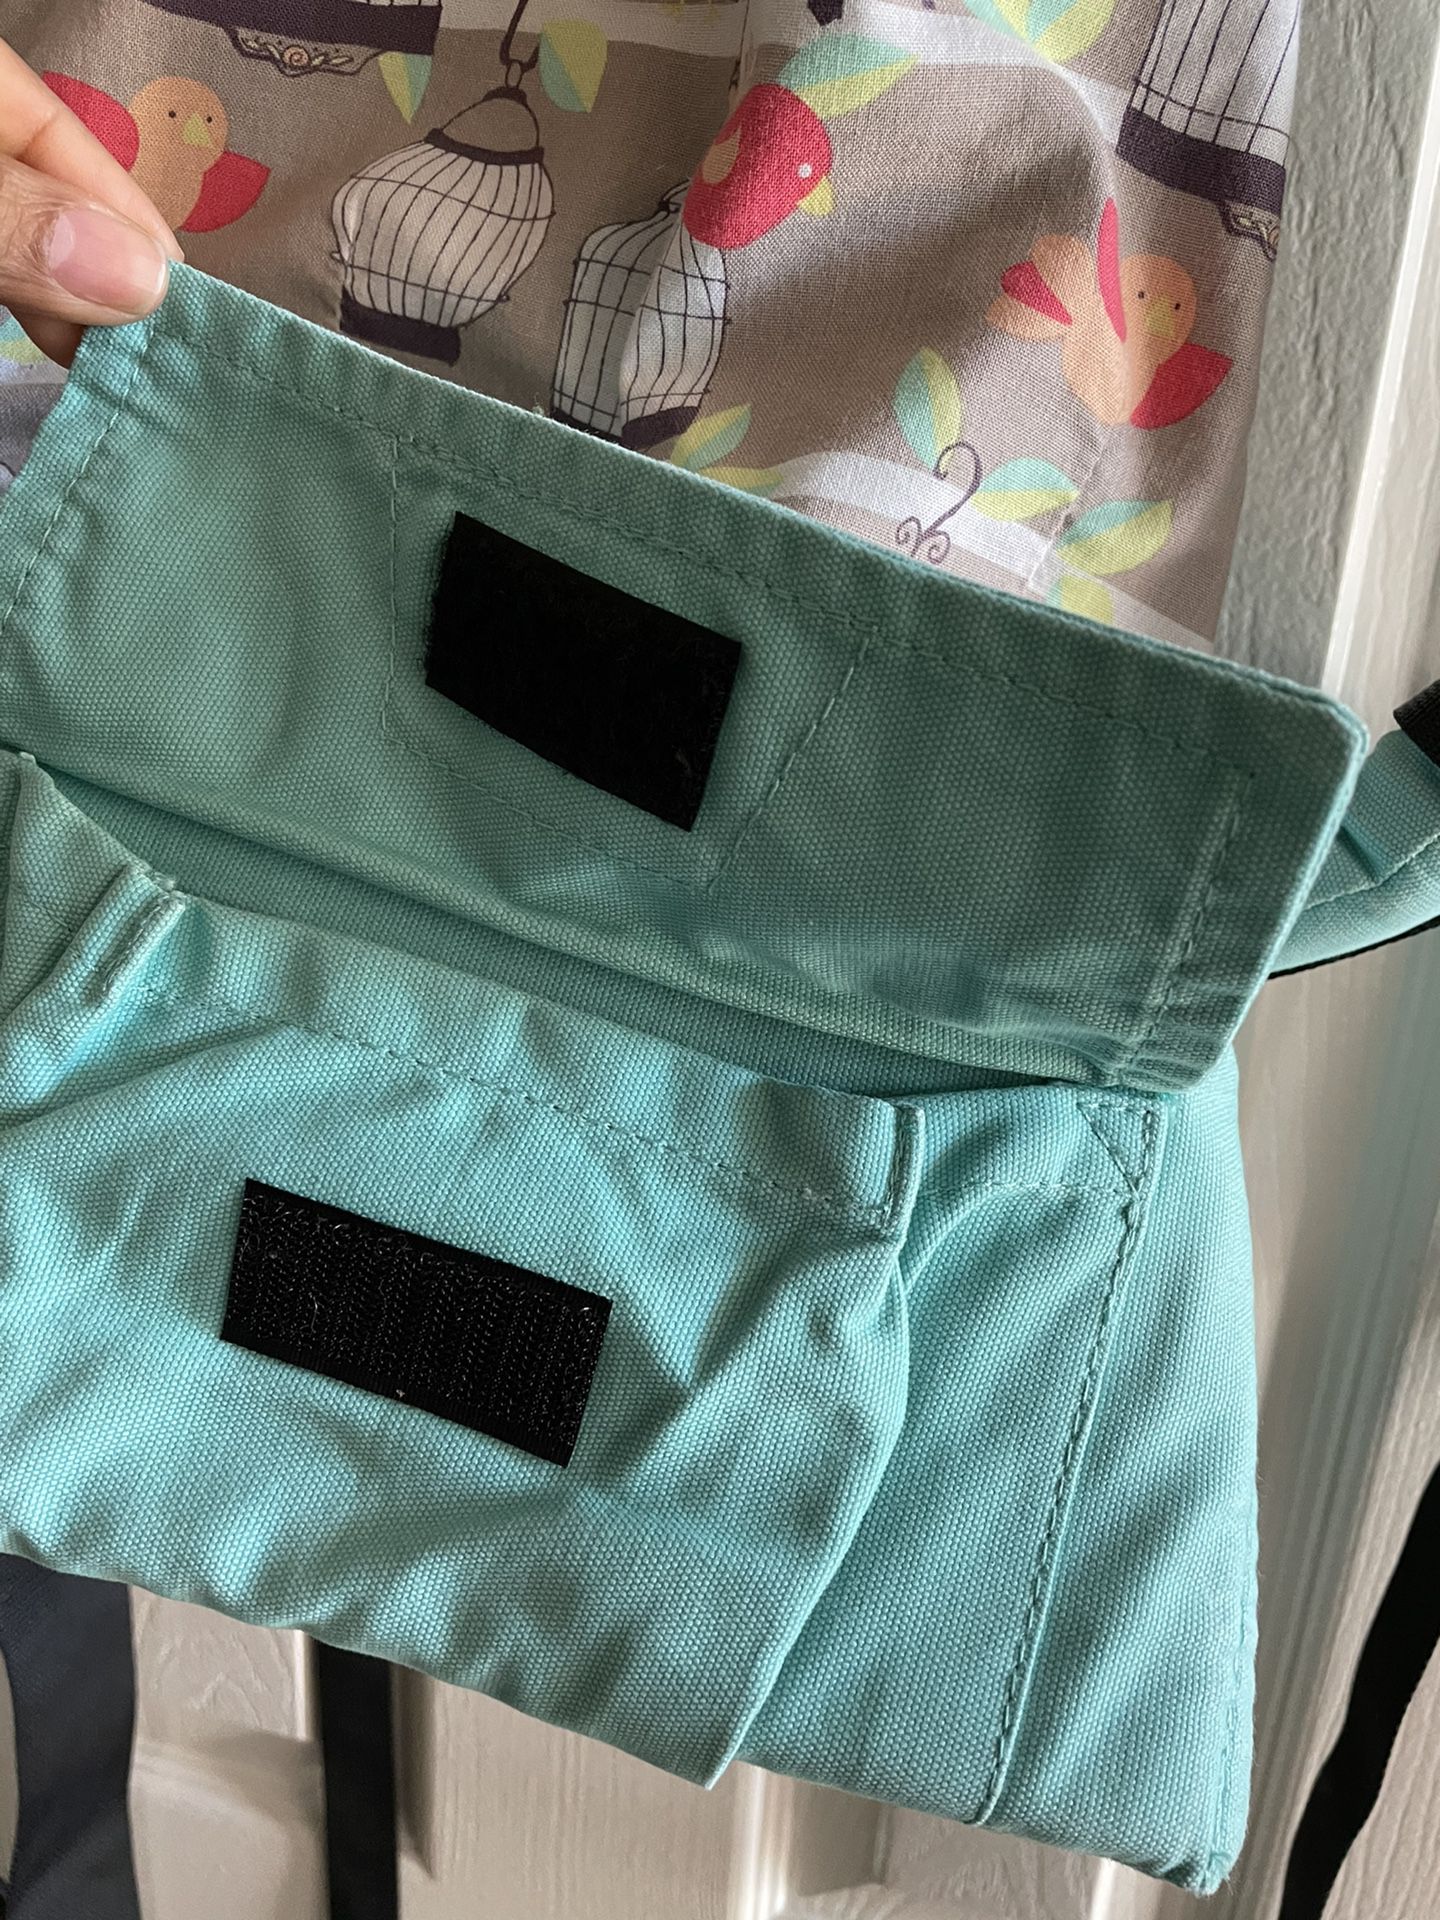 Tula baby Carrier 